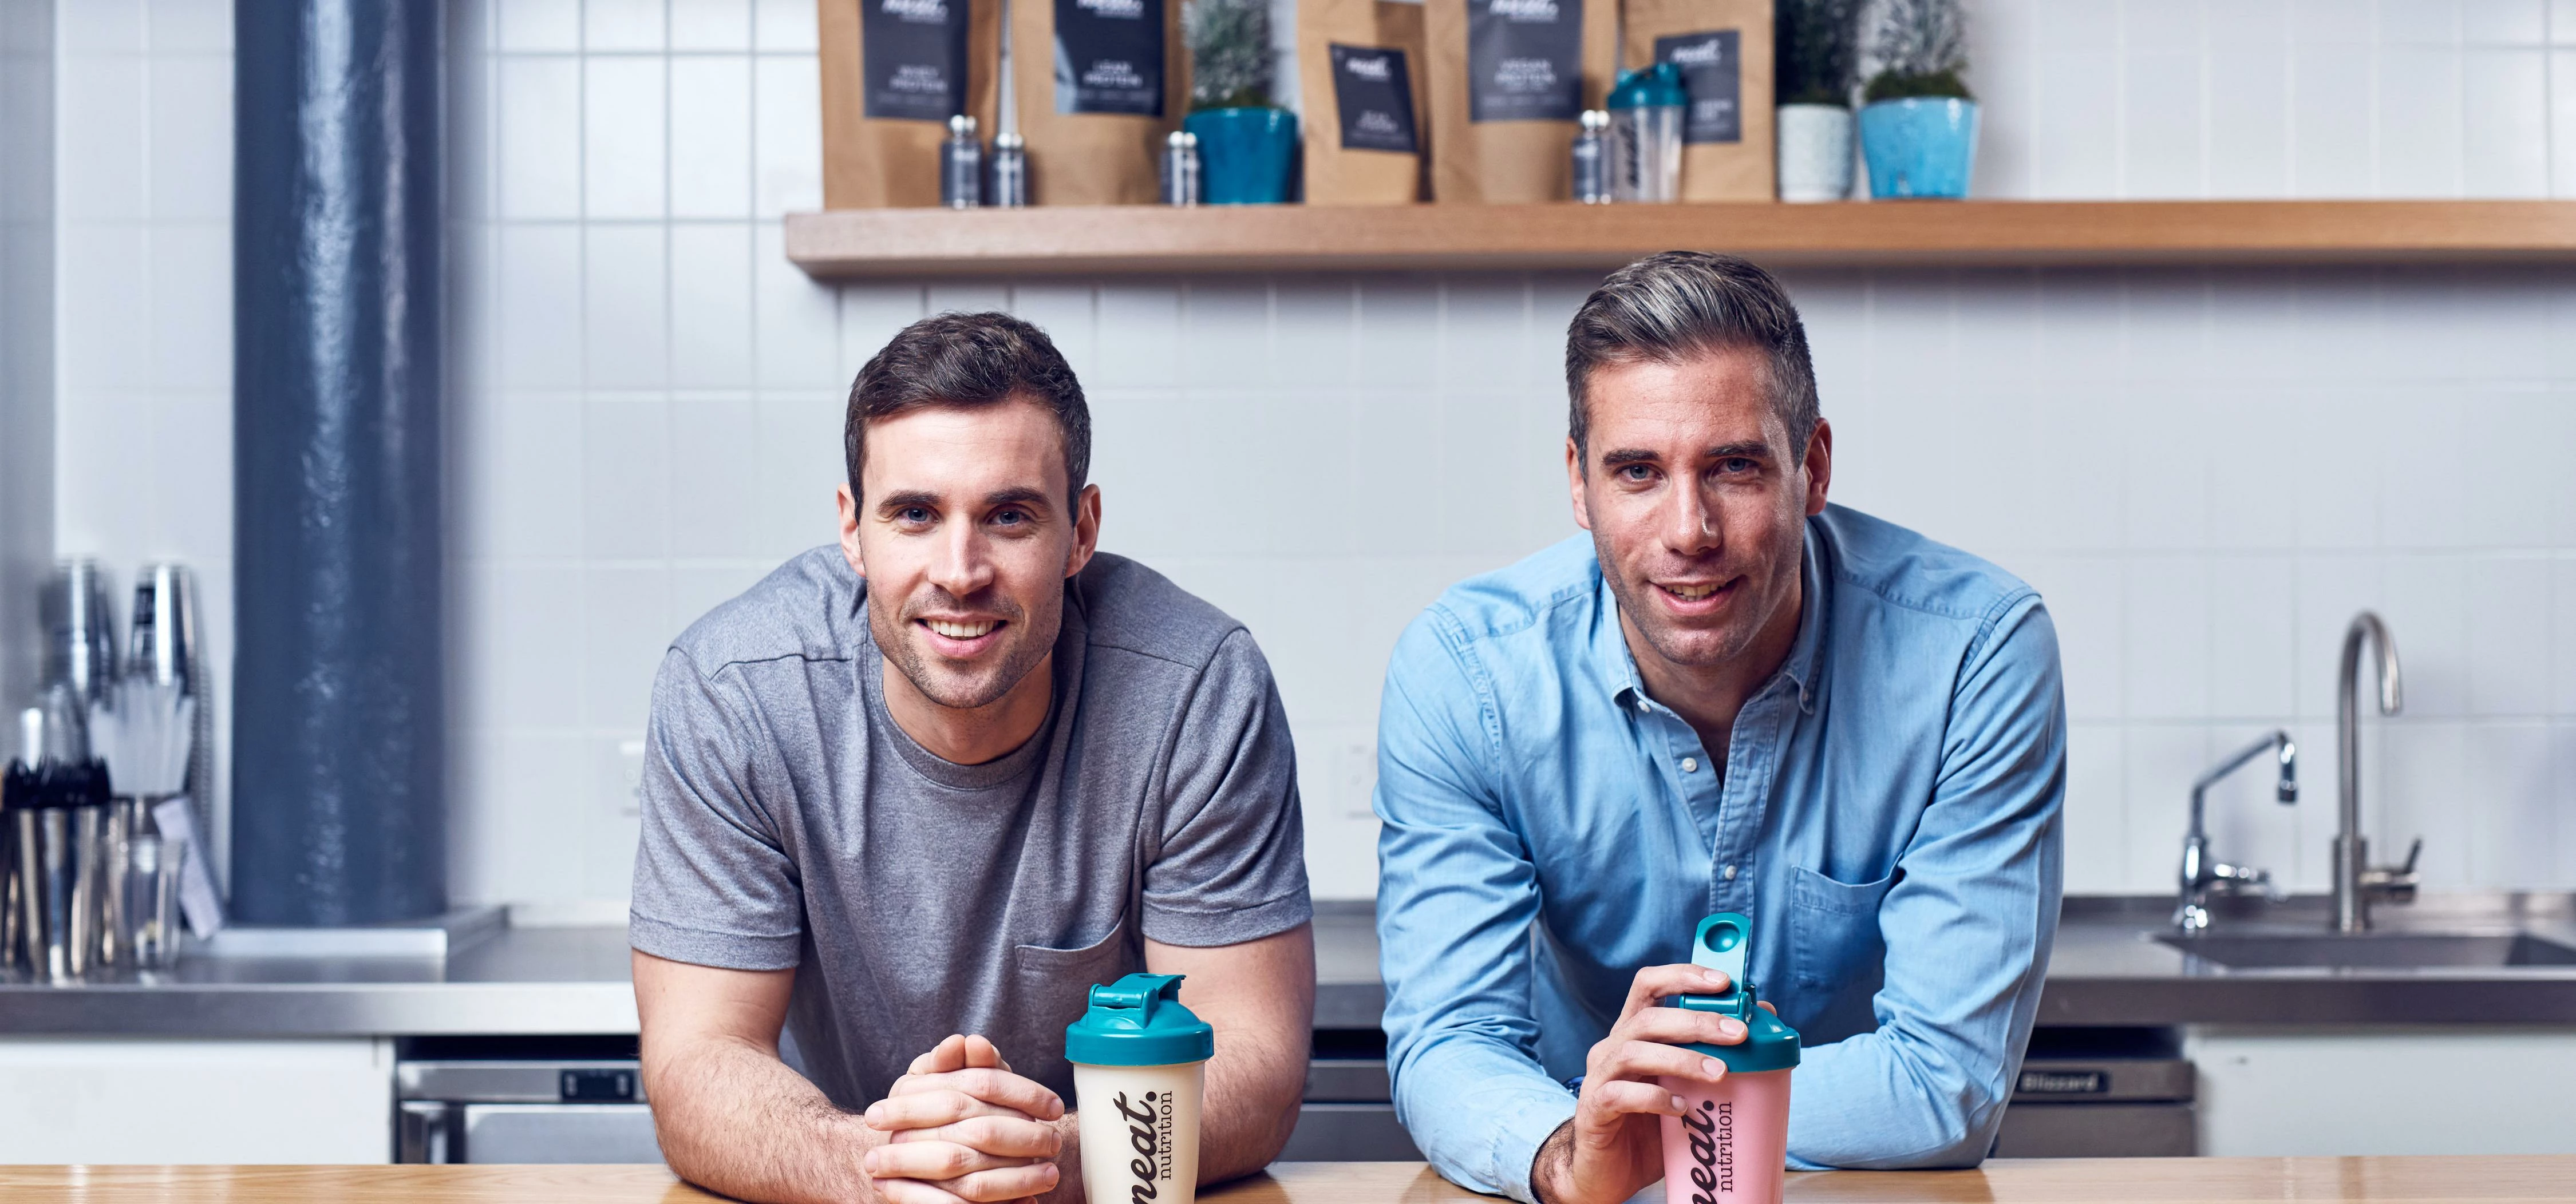 Neat Nutrition co-founders Charlie Turner and Lee Forster.